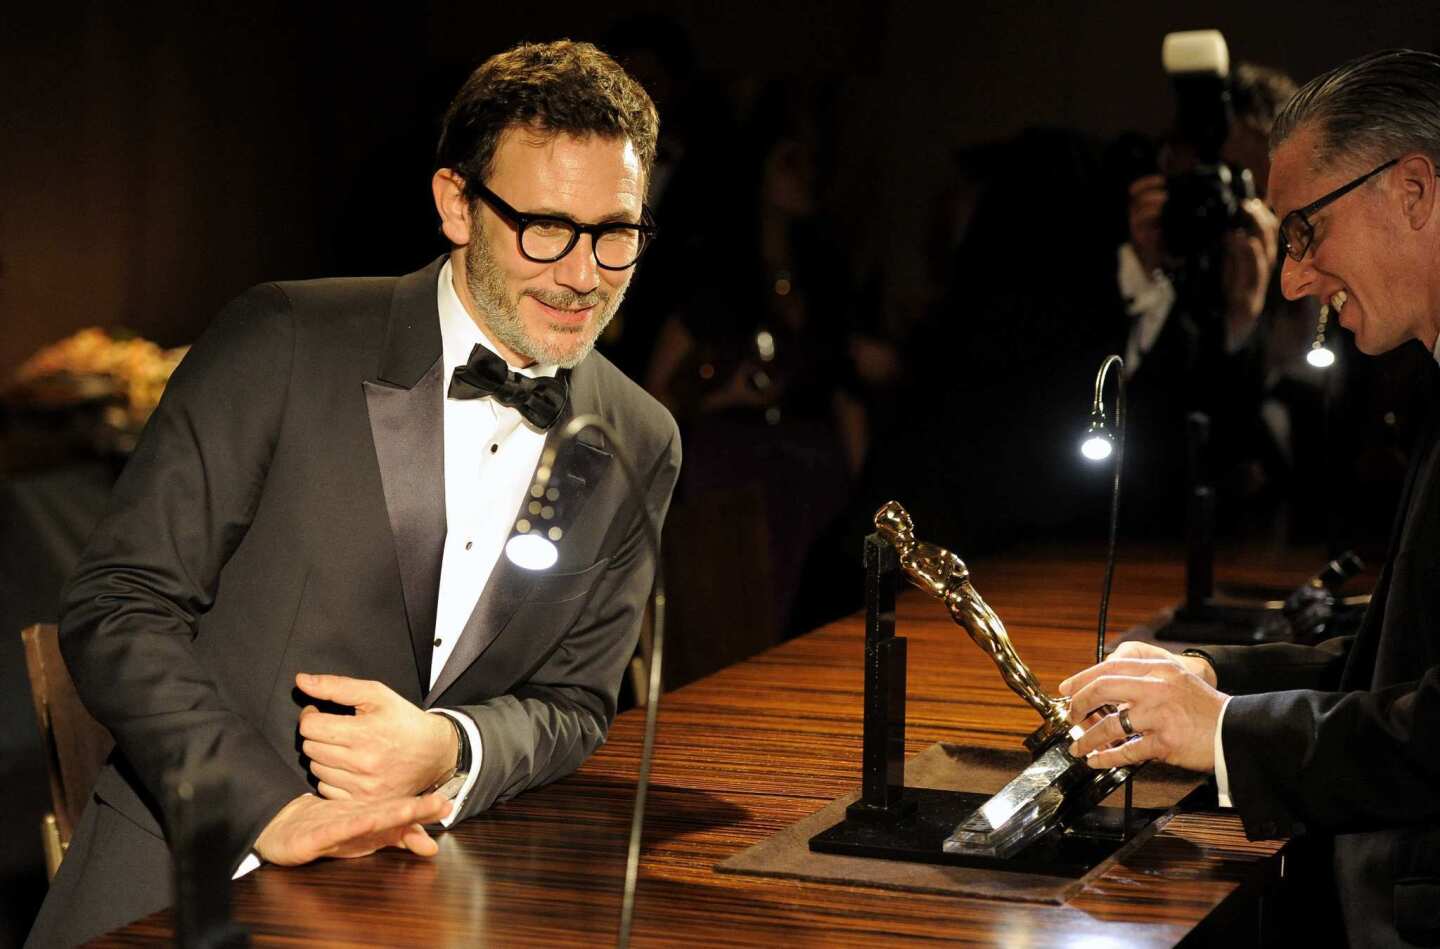 The Governors Ball, following the 84th Academy Awards, was packed with Oscar winners ¿ not least because that's where they get their statuettes engraved, as Michel Hazanavicius did with his best director Oscar on Sunday night.